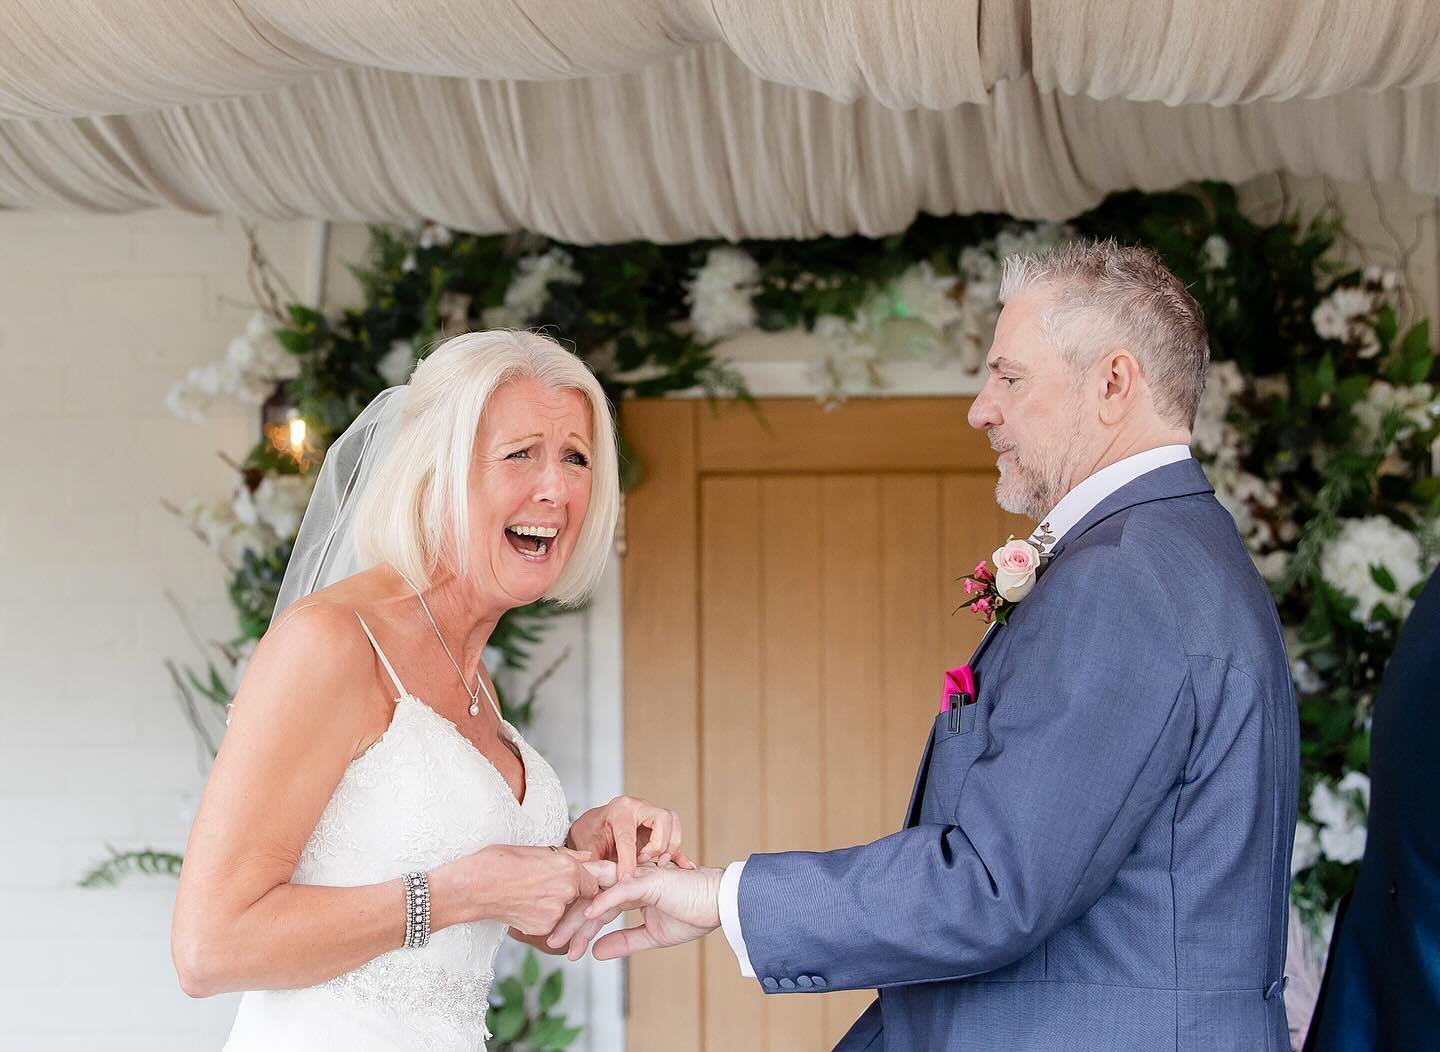 Erica was absolutely over the moon to get that ring on Dave&rsquo;s finger! I&rsquo;ve loved editing all the images from their day and I can&rsquo;t wait to share them all with the happy couple VERY soon! 😍🤩😍

#weddingday #gettingmarried #weddingc